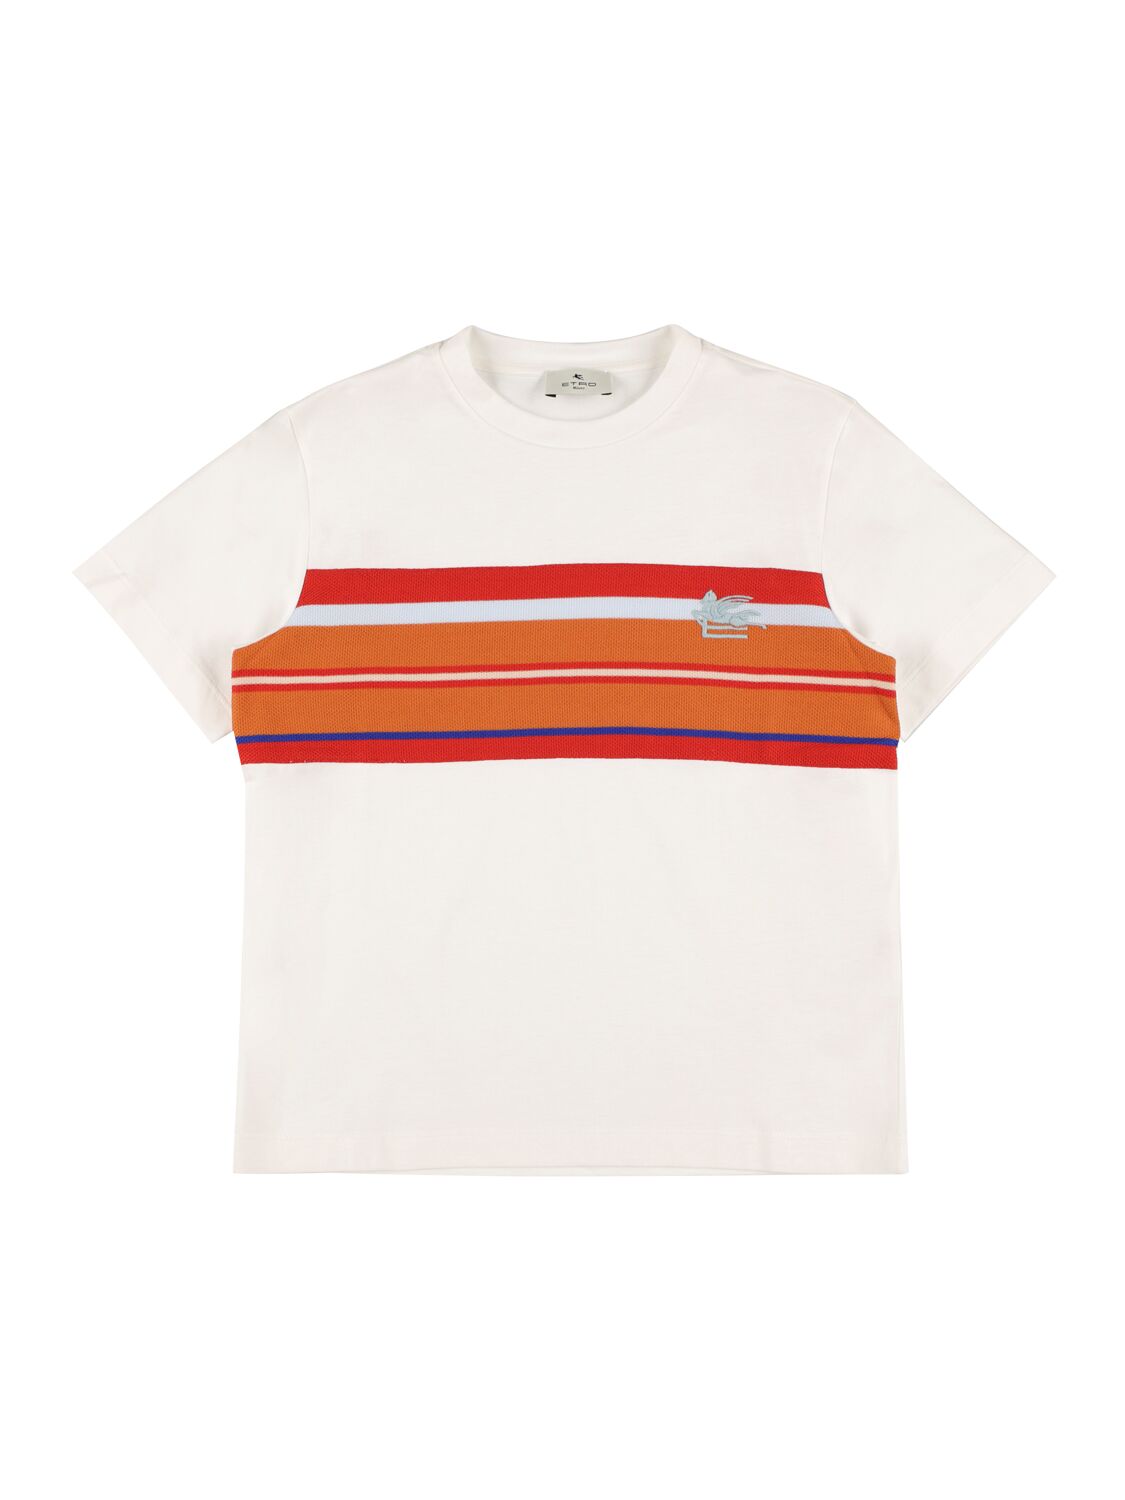 Image of Cotton Jersey T-shirt